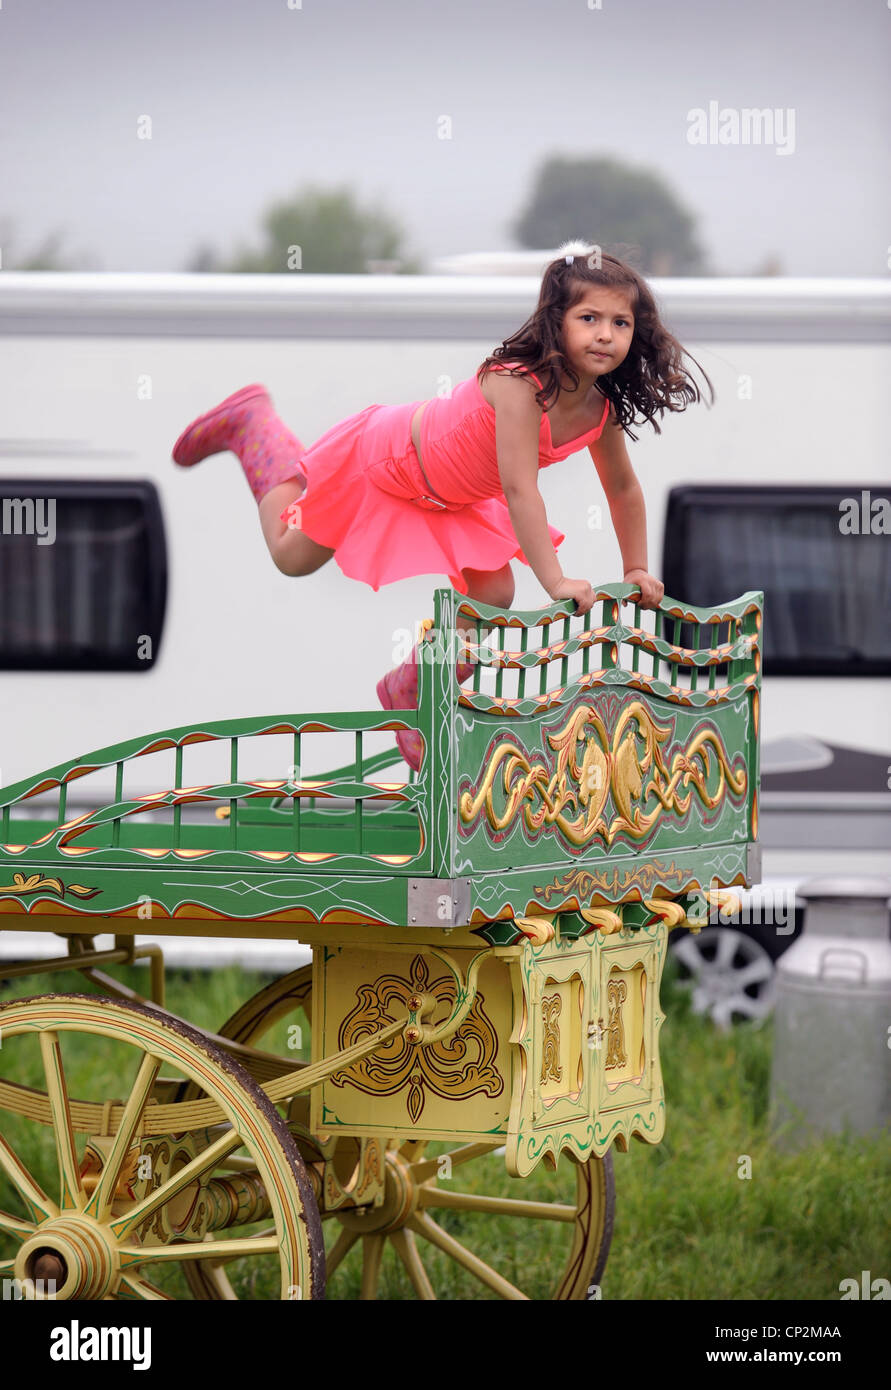 A girl stands upon a decorative trailer at the Stow-on-the-Wold horse fair May 2009 UK Stock Photo